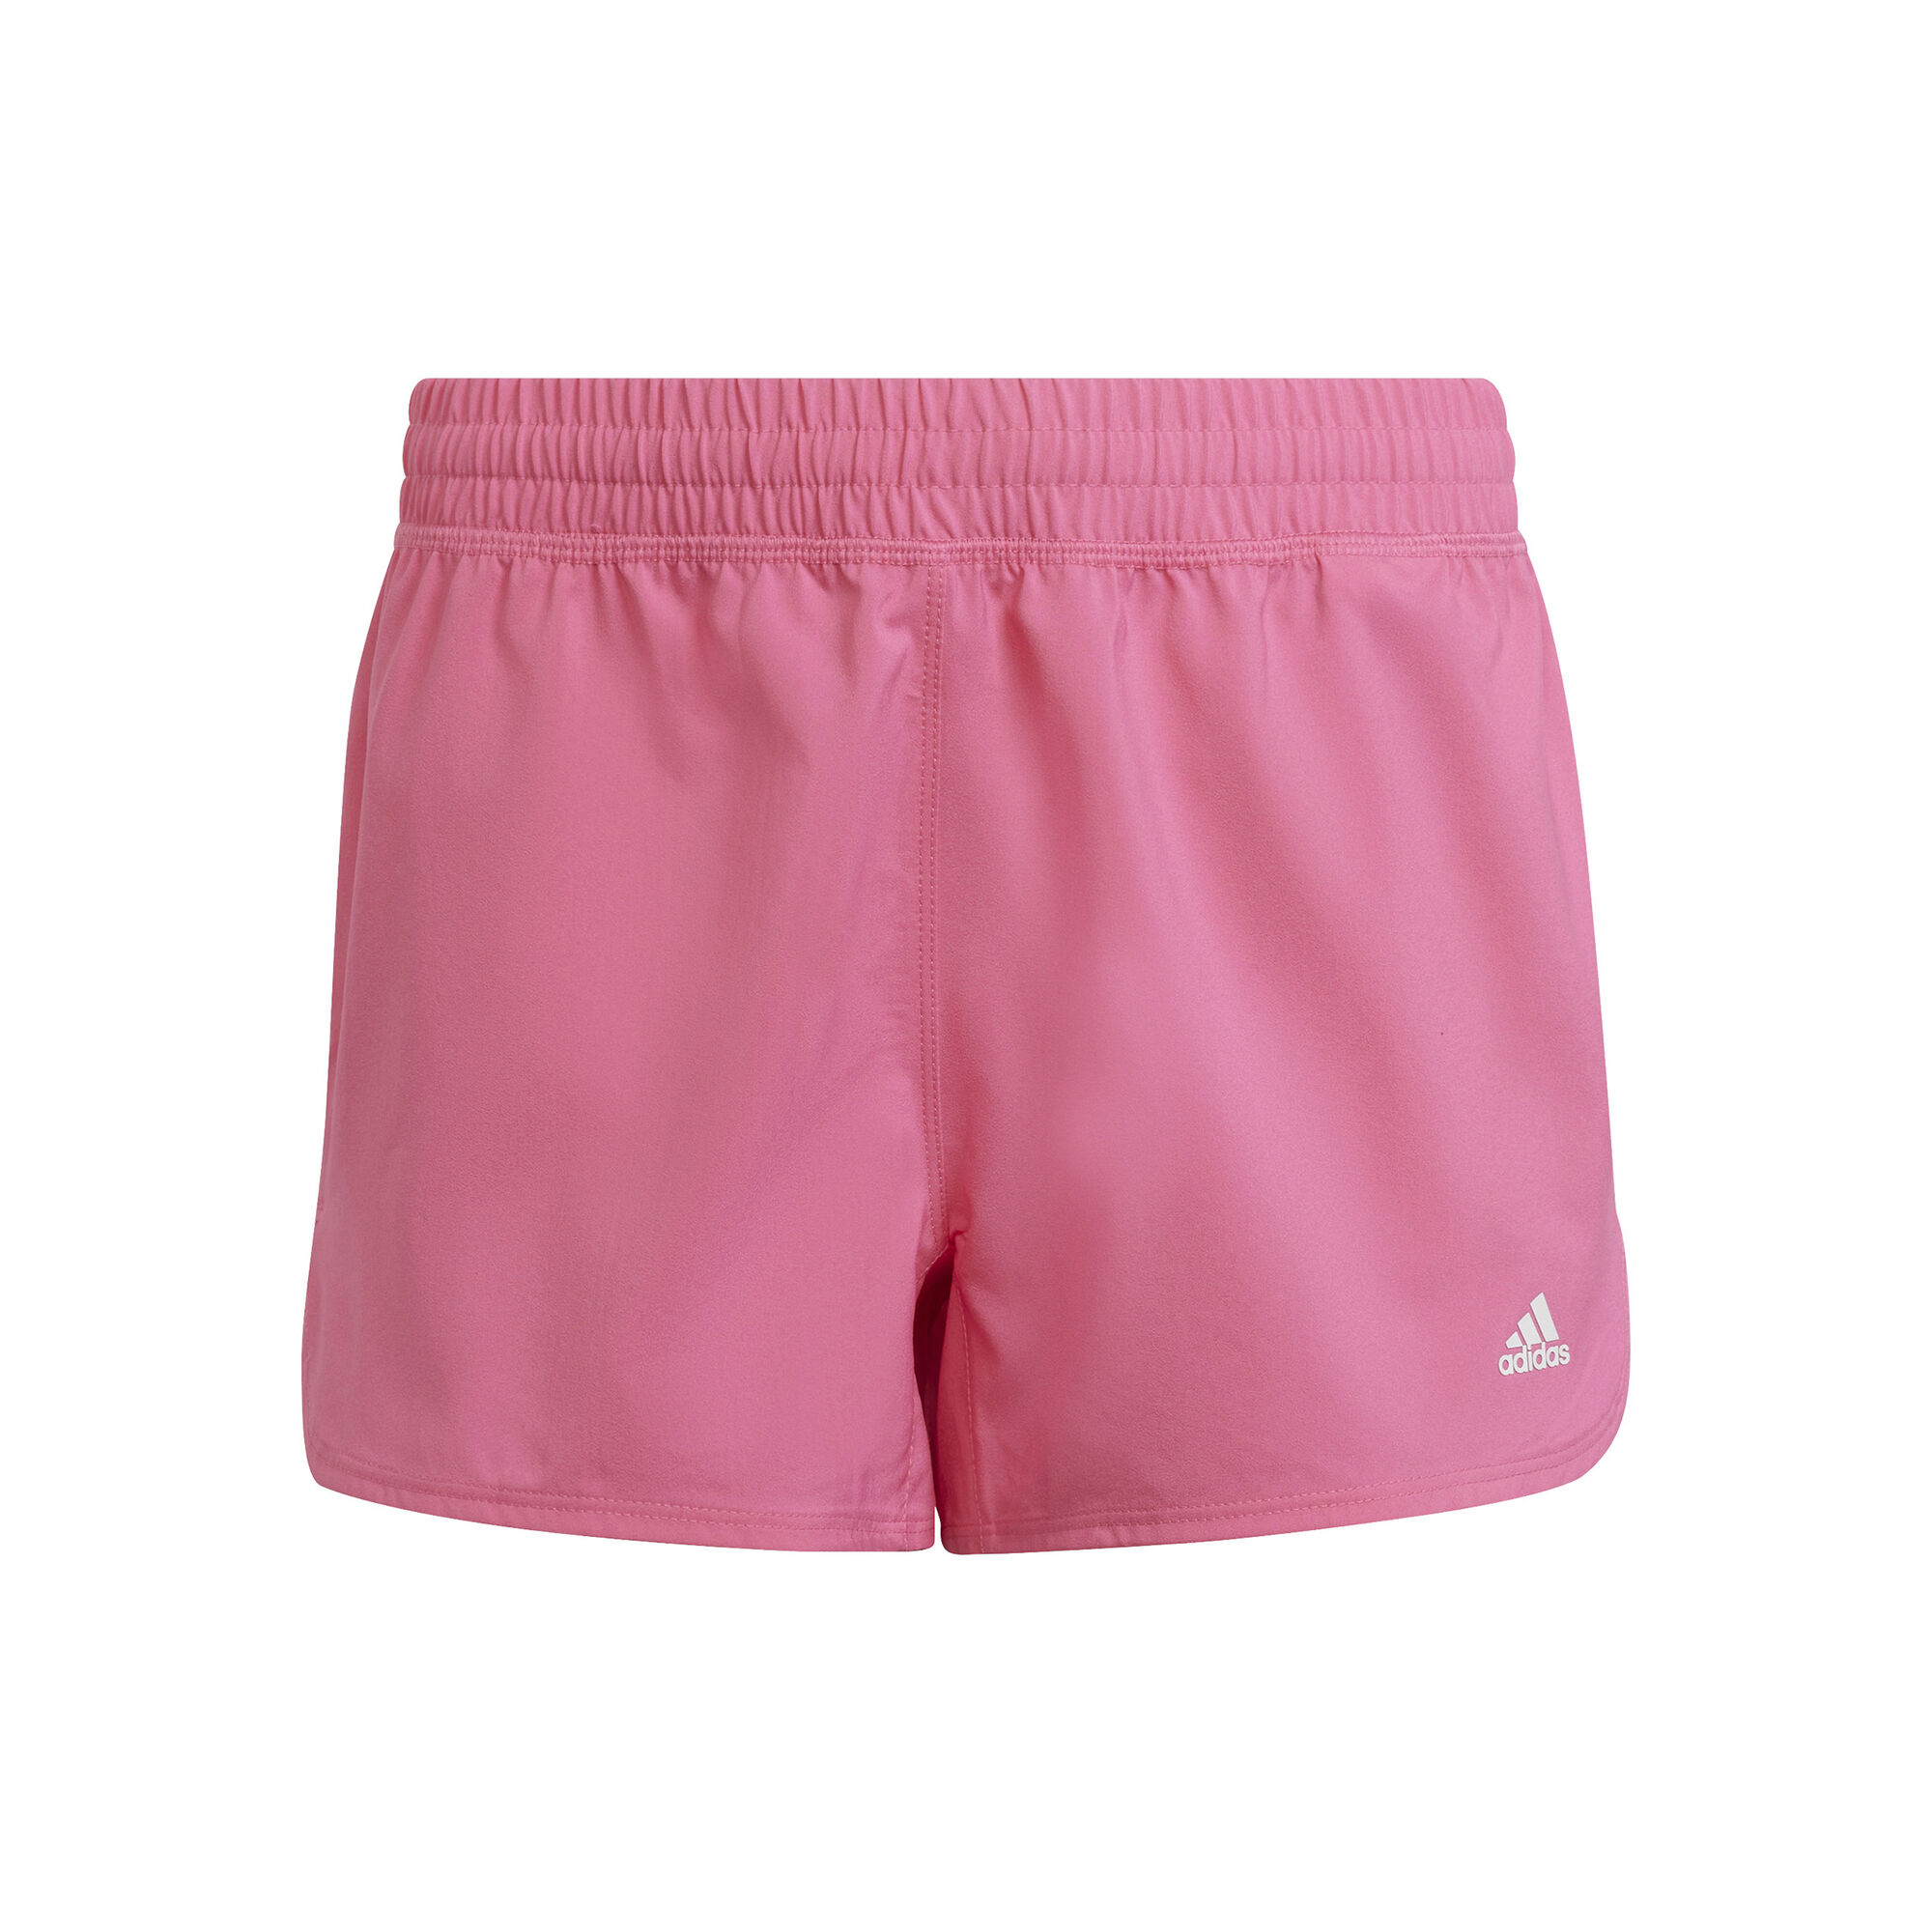 Aeroknit Pacer Shorts Chicas - Rosa compra online | Tennis-Point